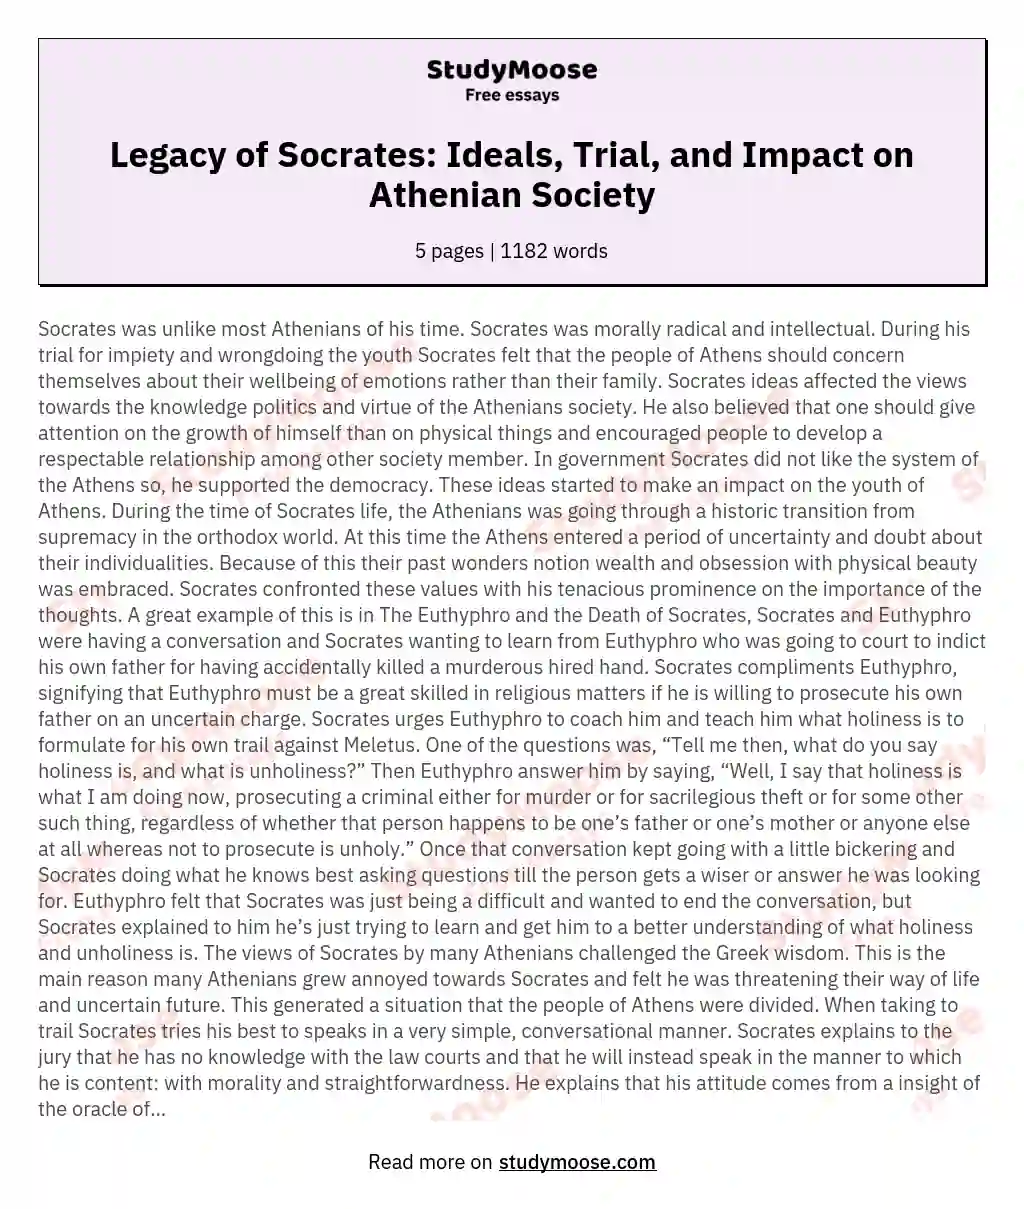 Legacy of Socrates: Ideals, Trial, and Impact on Athenian Society essay